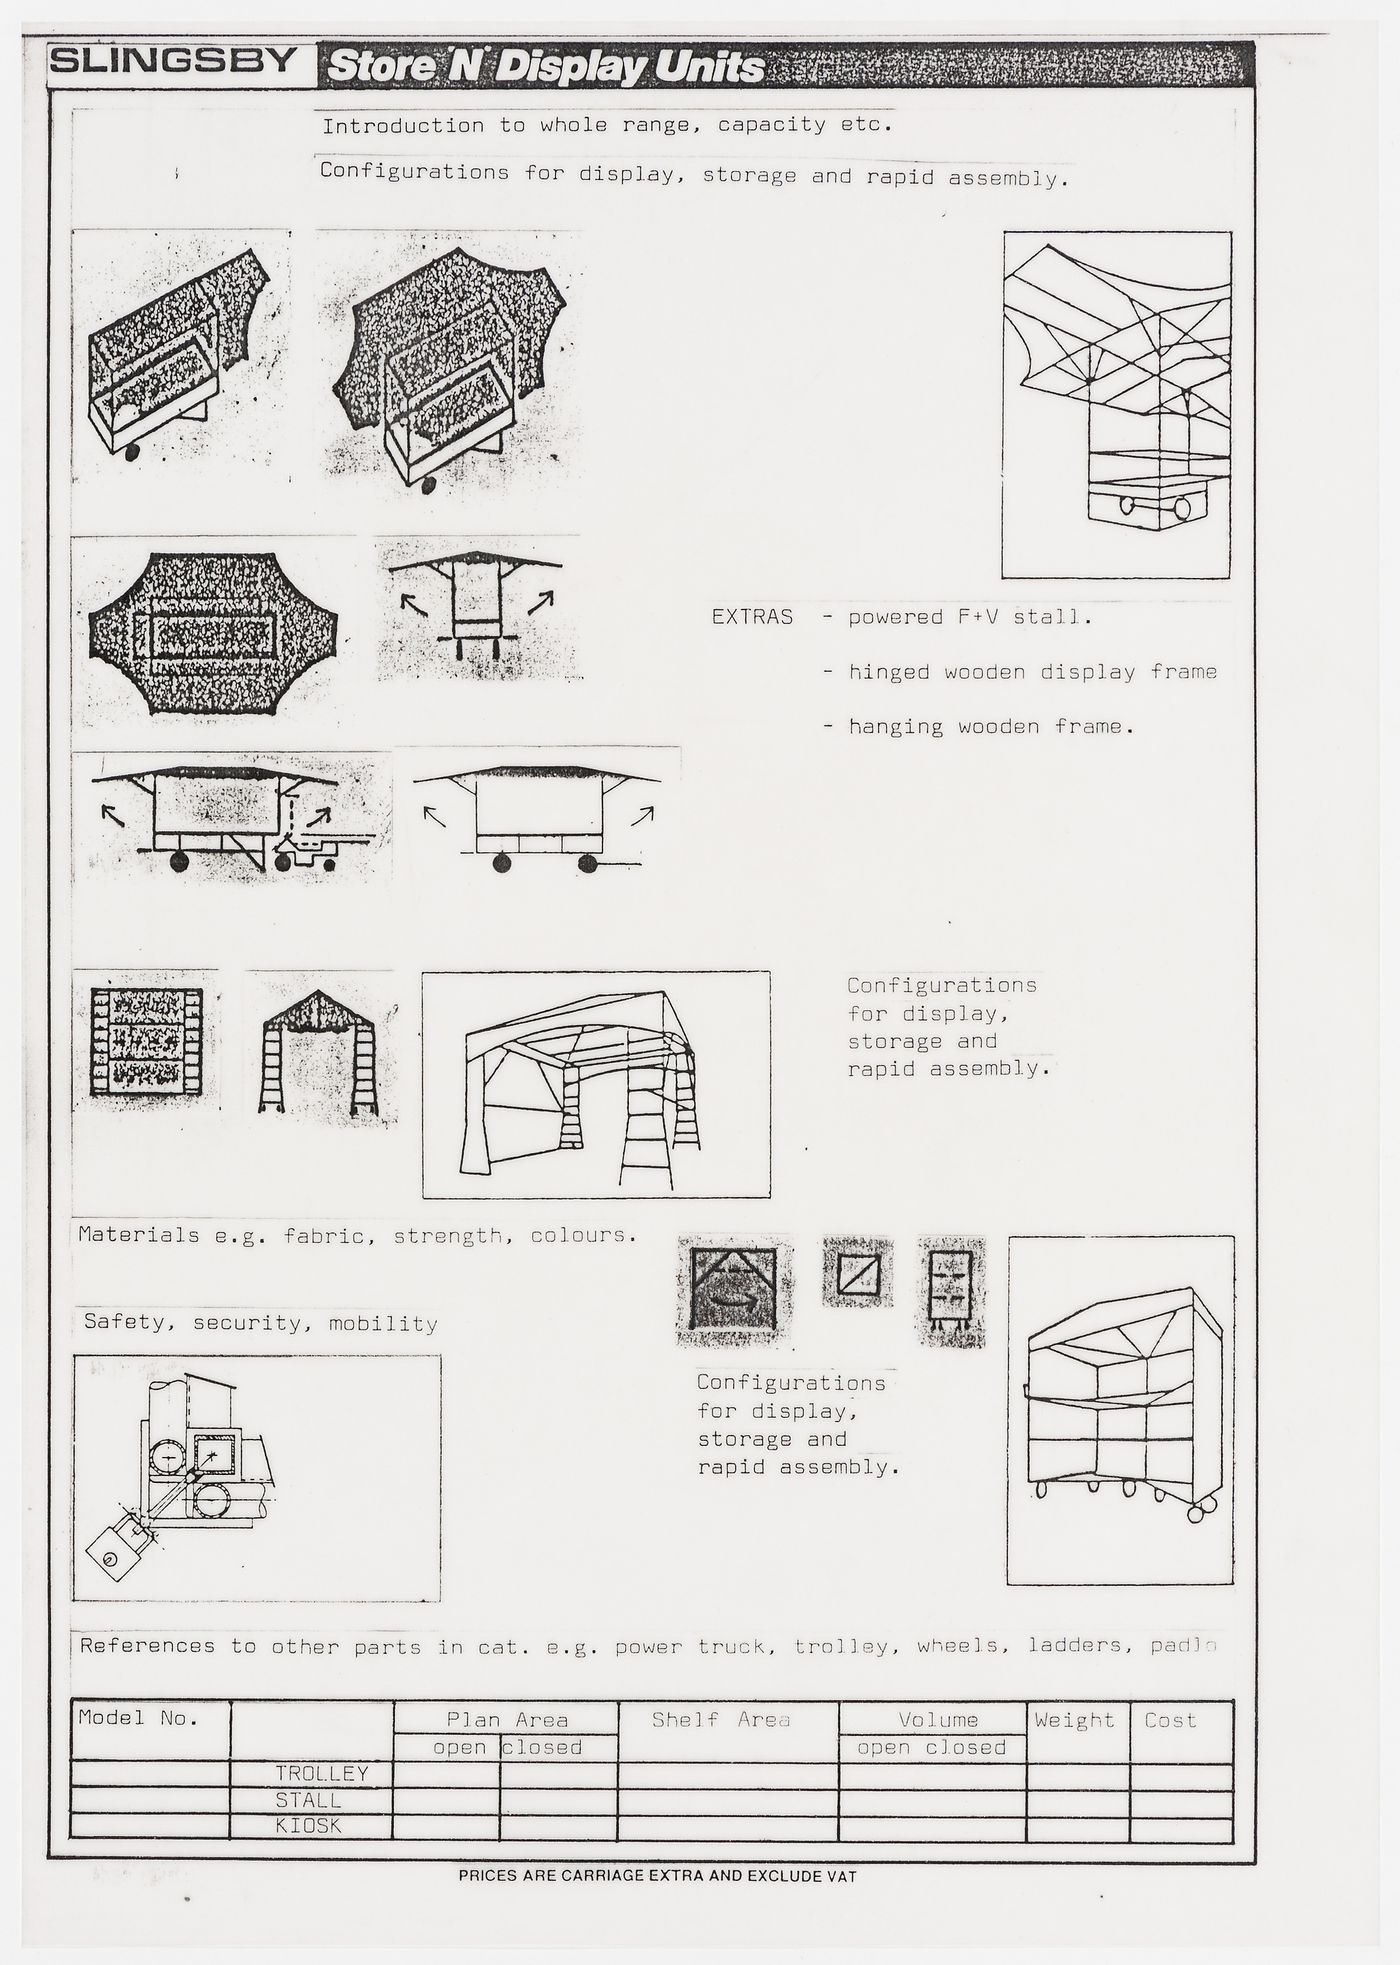 Westal: proposed layout for a page in a Slingsby Catalogue